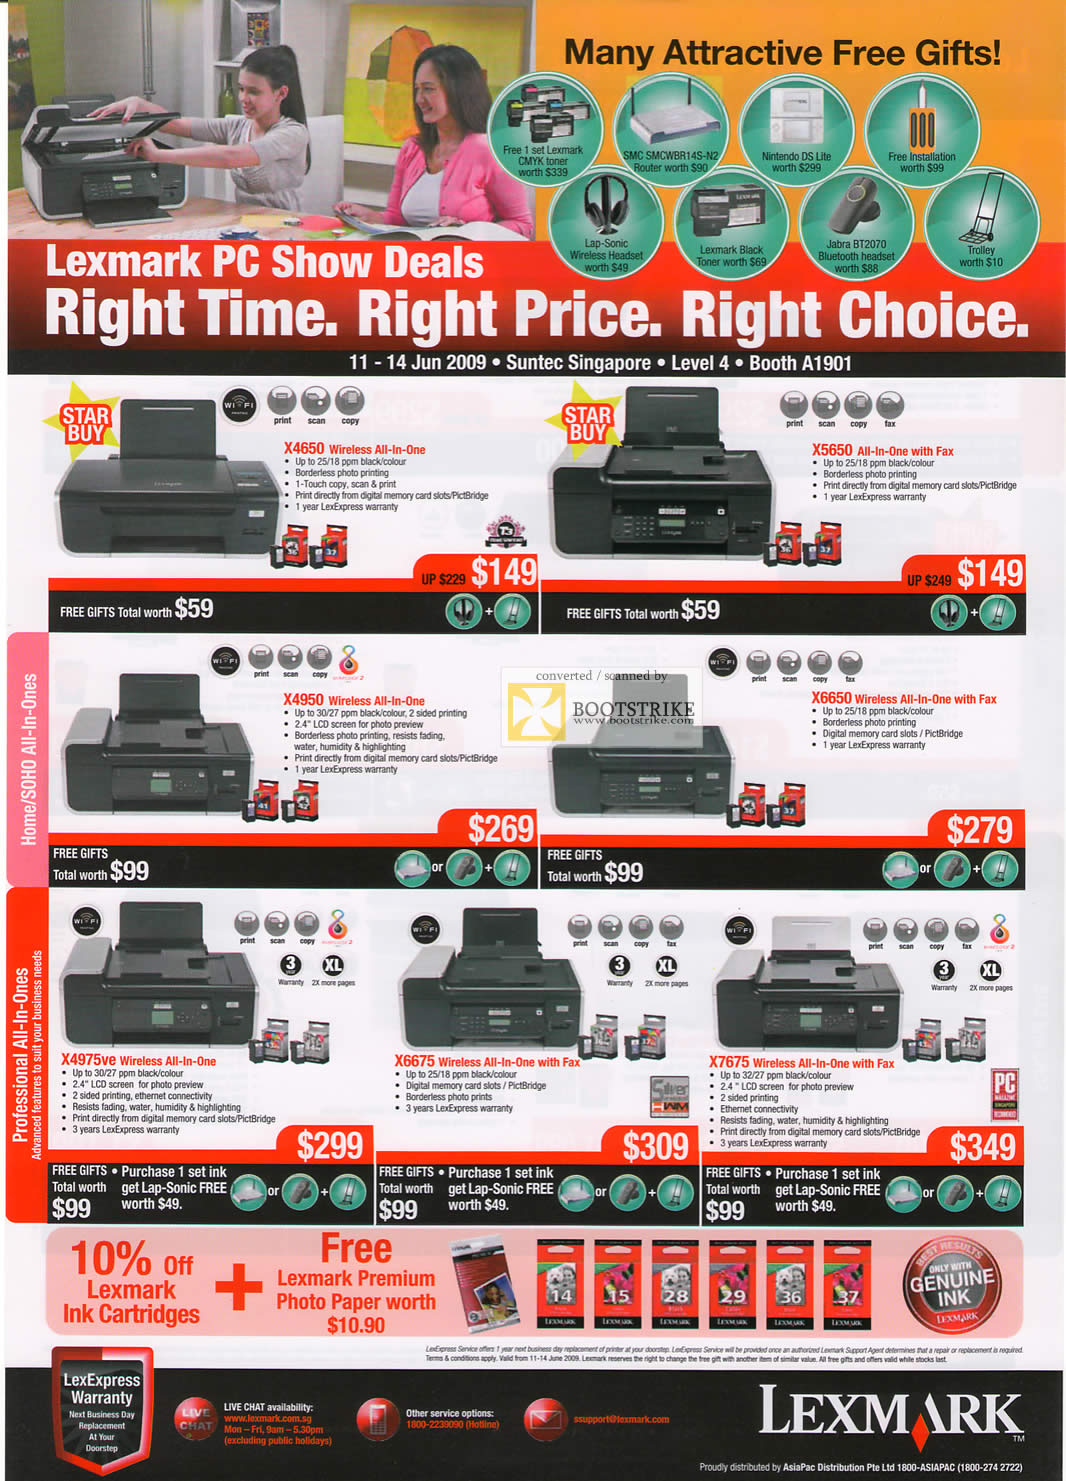 PC Show 2009 price list image brochure of Lexmark Printers X4650 X5650 All-In-One Professional Home